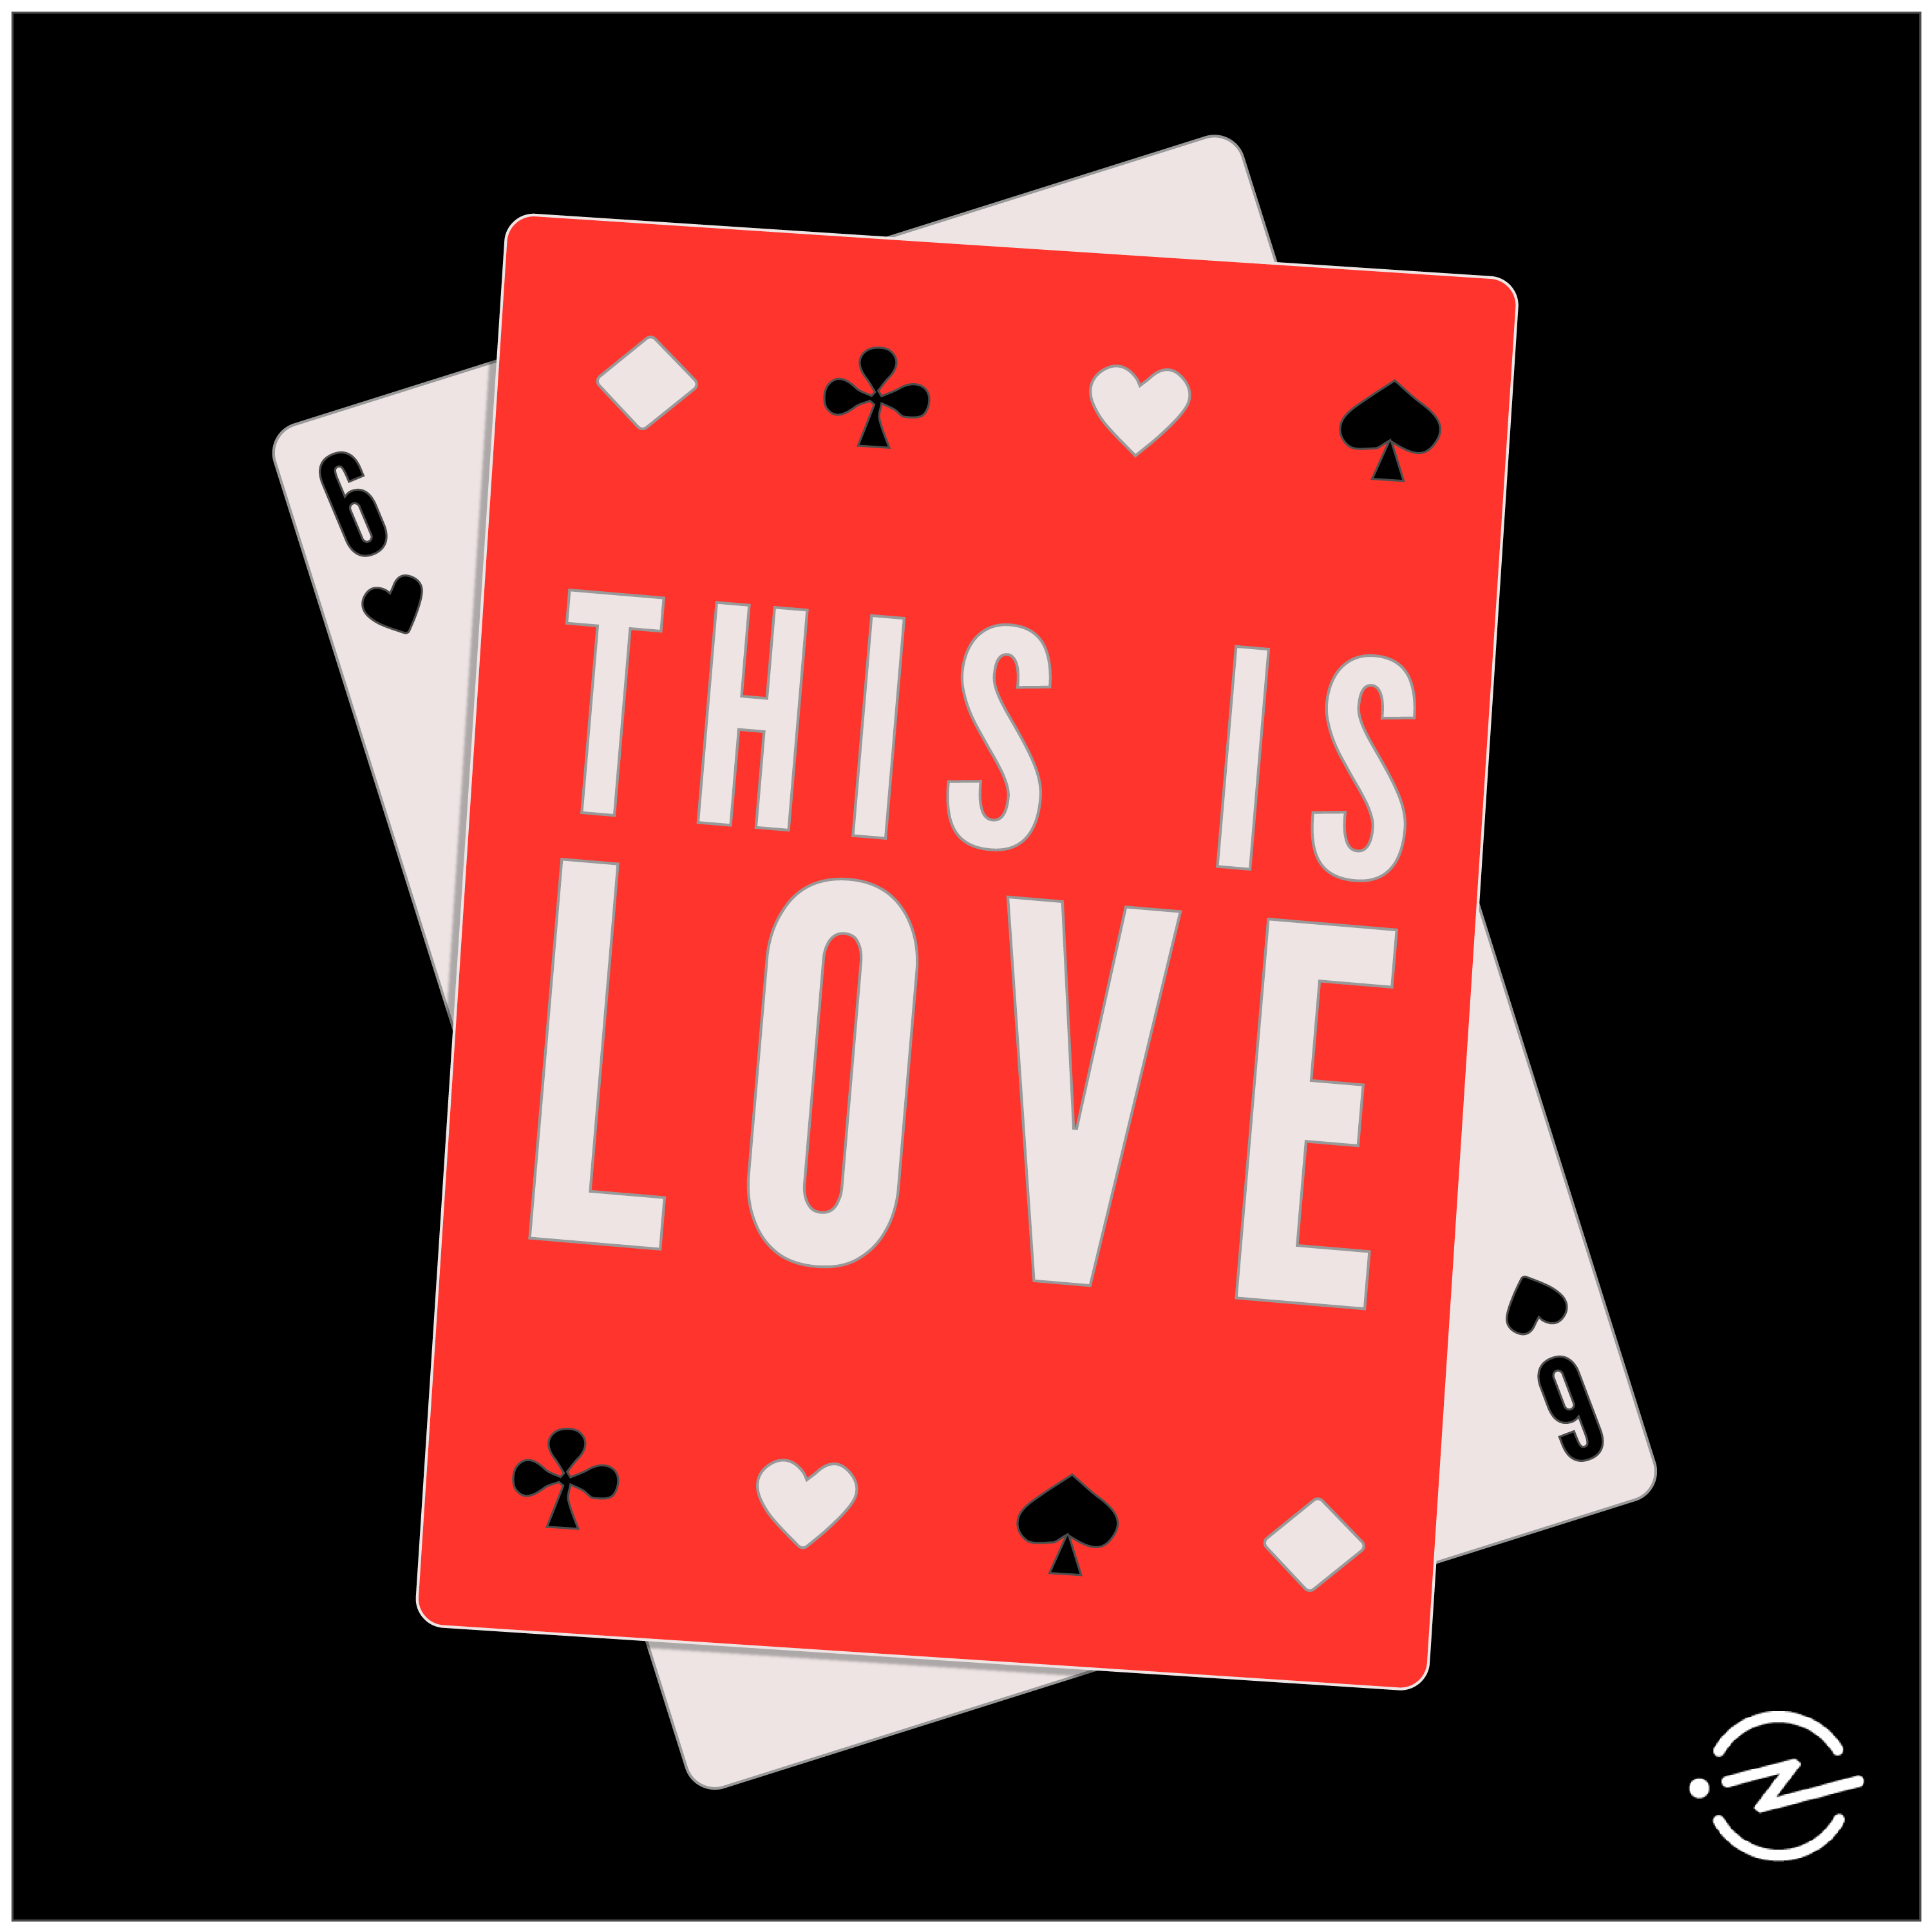 A bold, love-themed playing card stands out atop a fanned-out hand of classic playing cards.